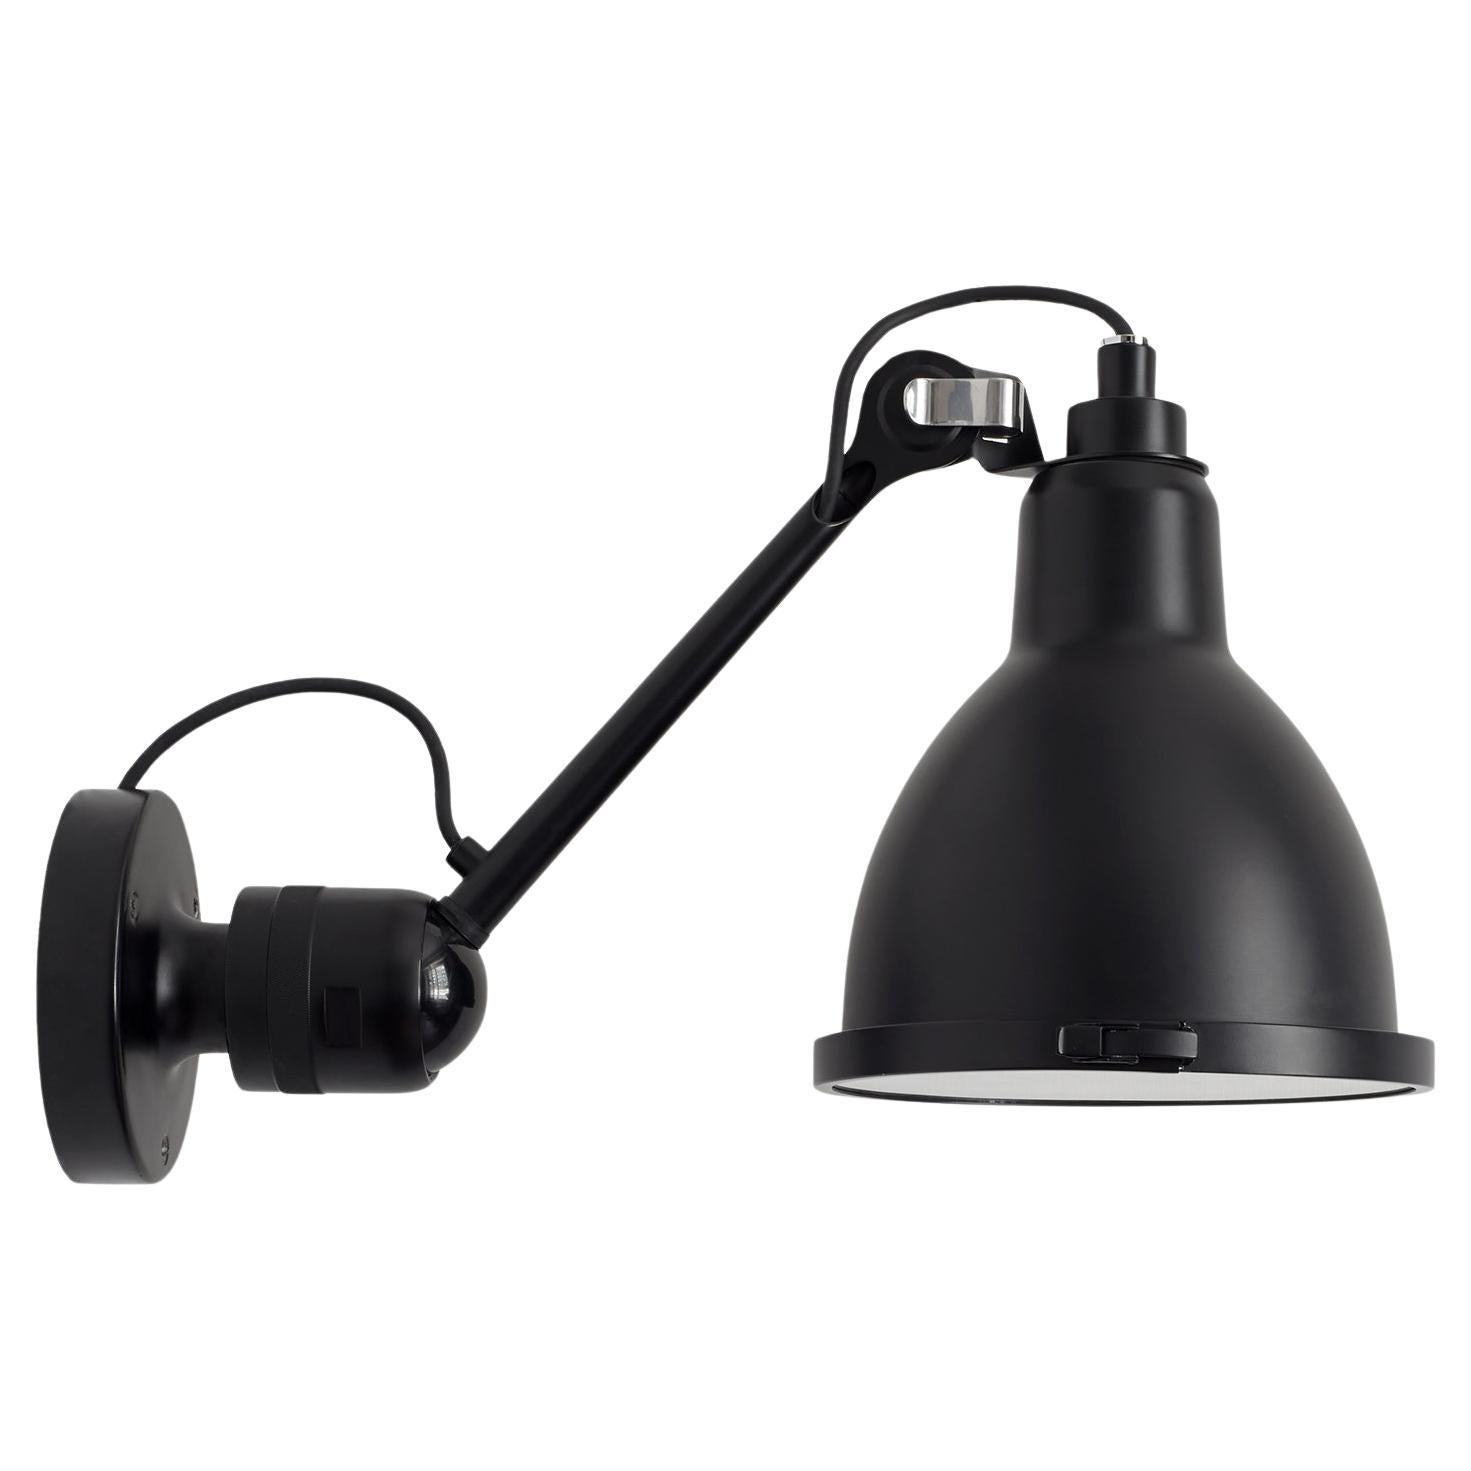 DCW Editions La Lampe Gras N°304 XL Round Wall Lamp in Black Shade For Sale